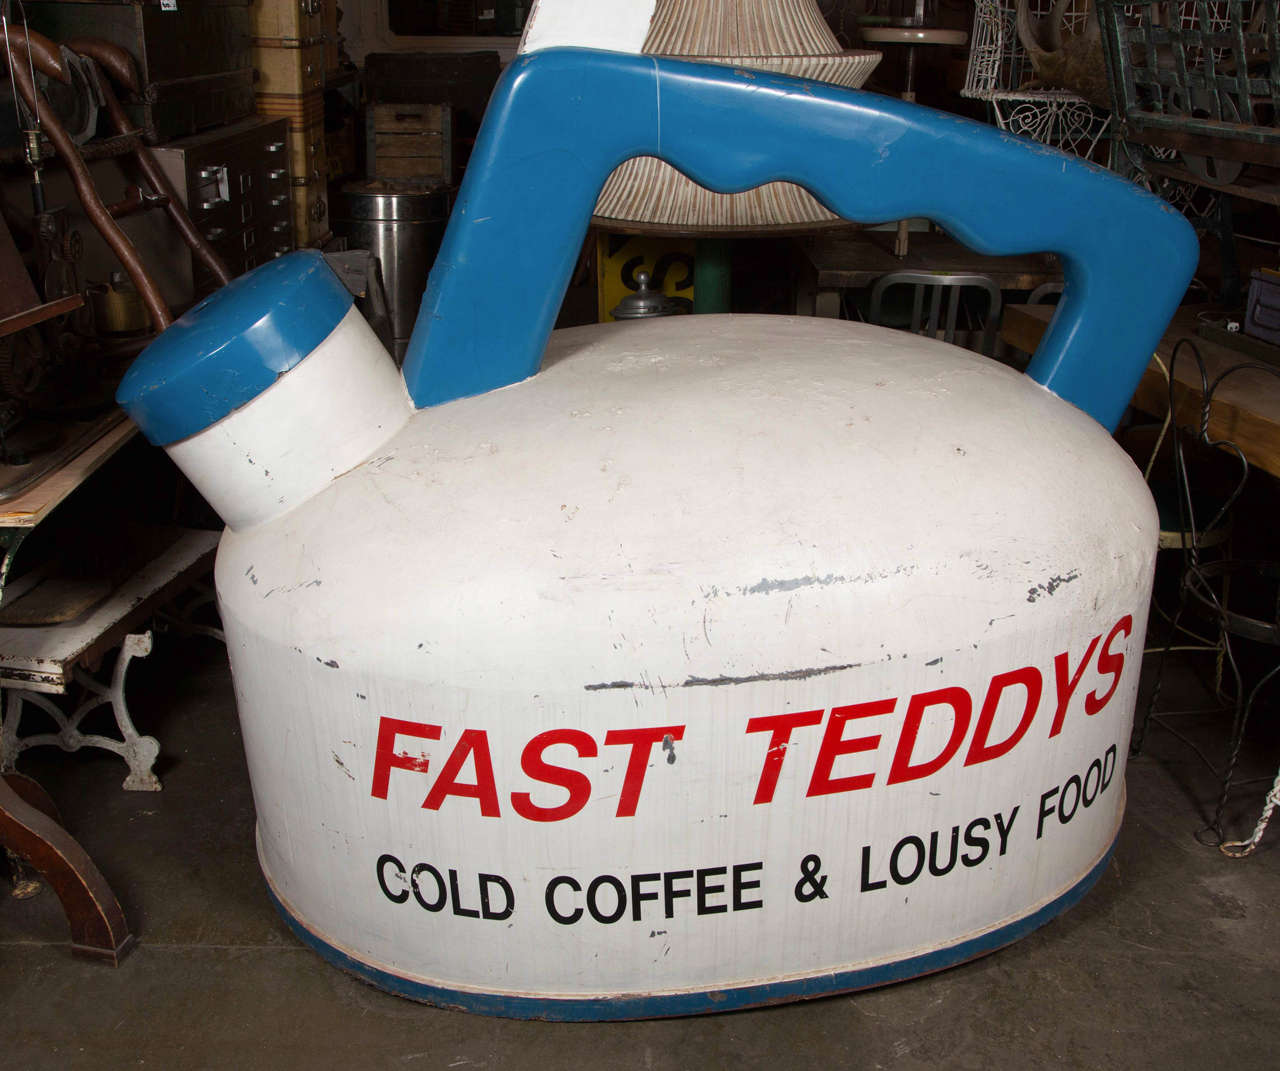 This is a larger than life 1940s Fast Teddy's Restaurant teapot sign. This sits flush to the ground with a blue handle and spout. The teapot itself is a scuffed white with red and black lettering. This can be seen at our 400 Gilligan St location in